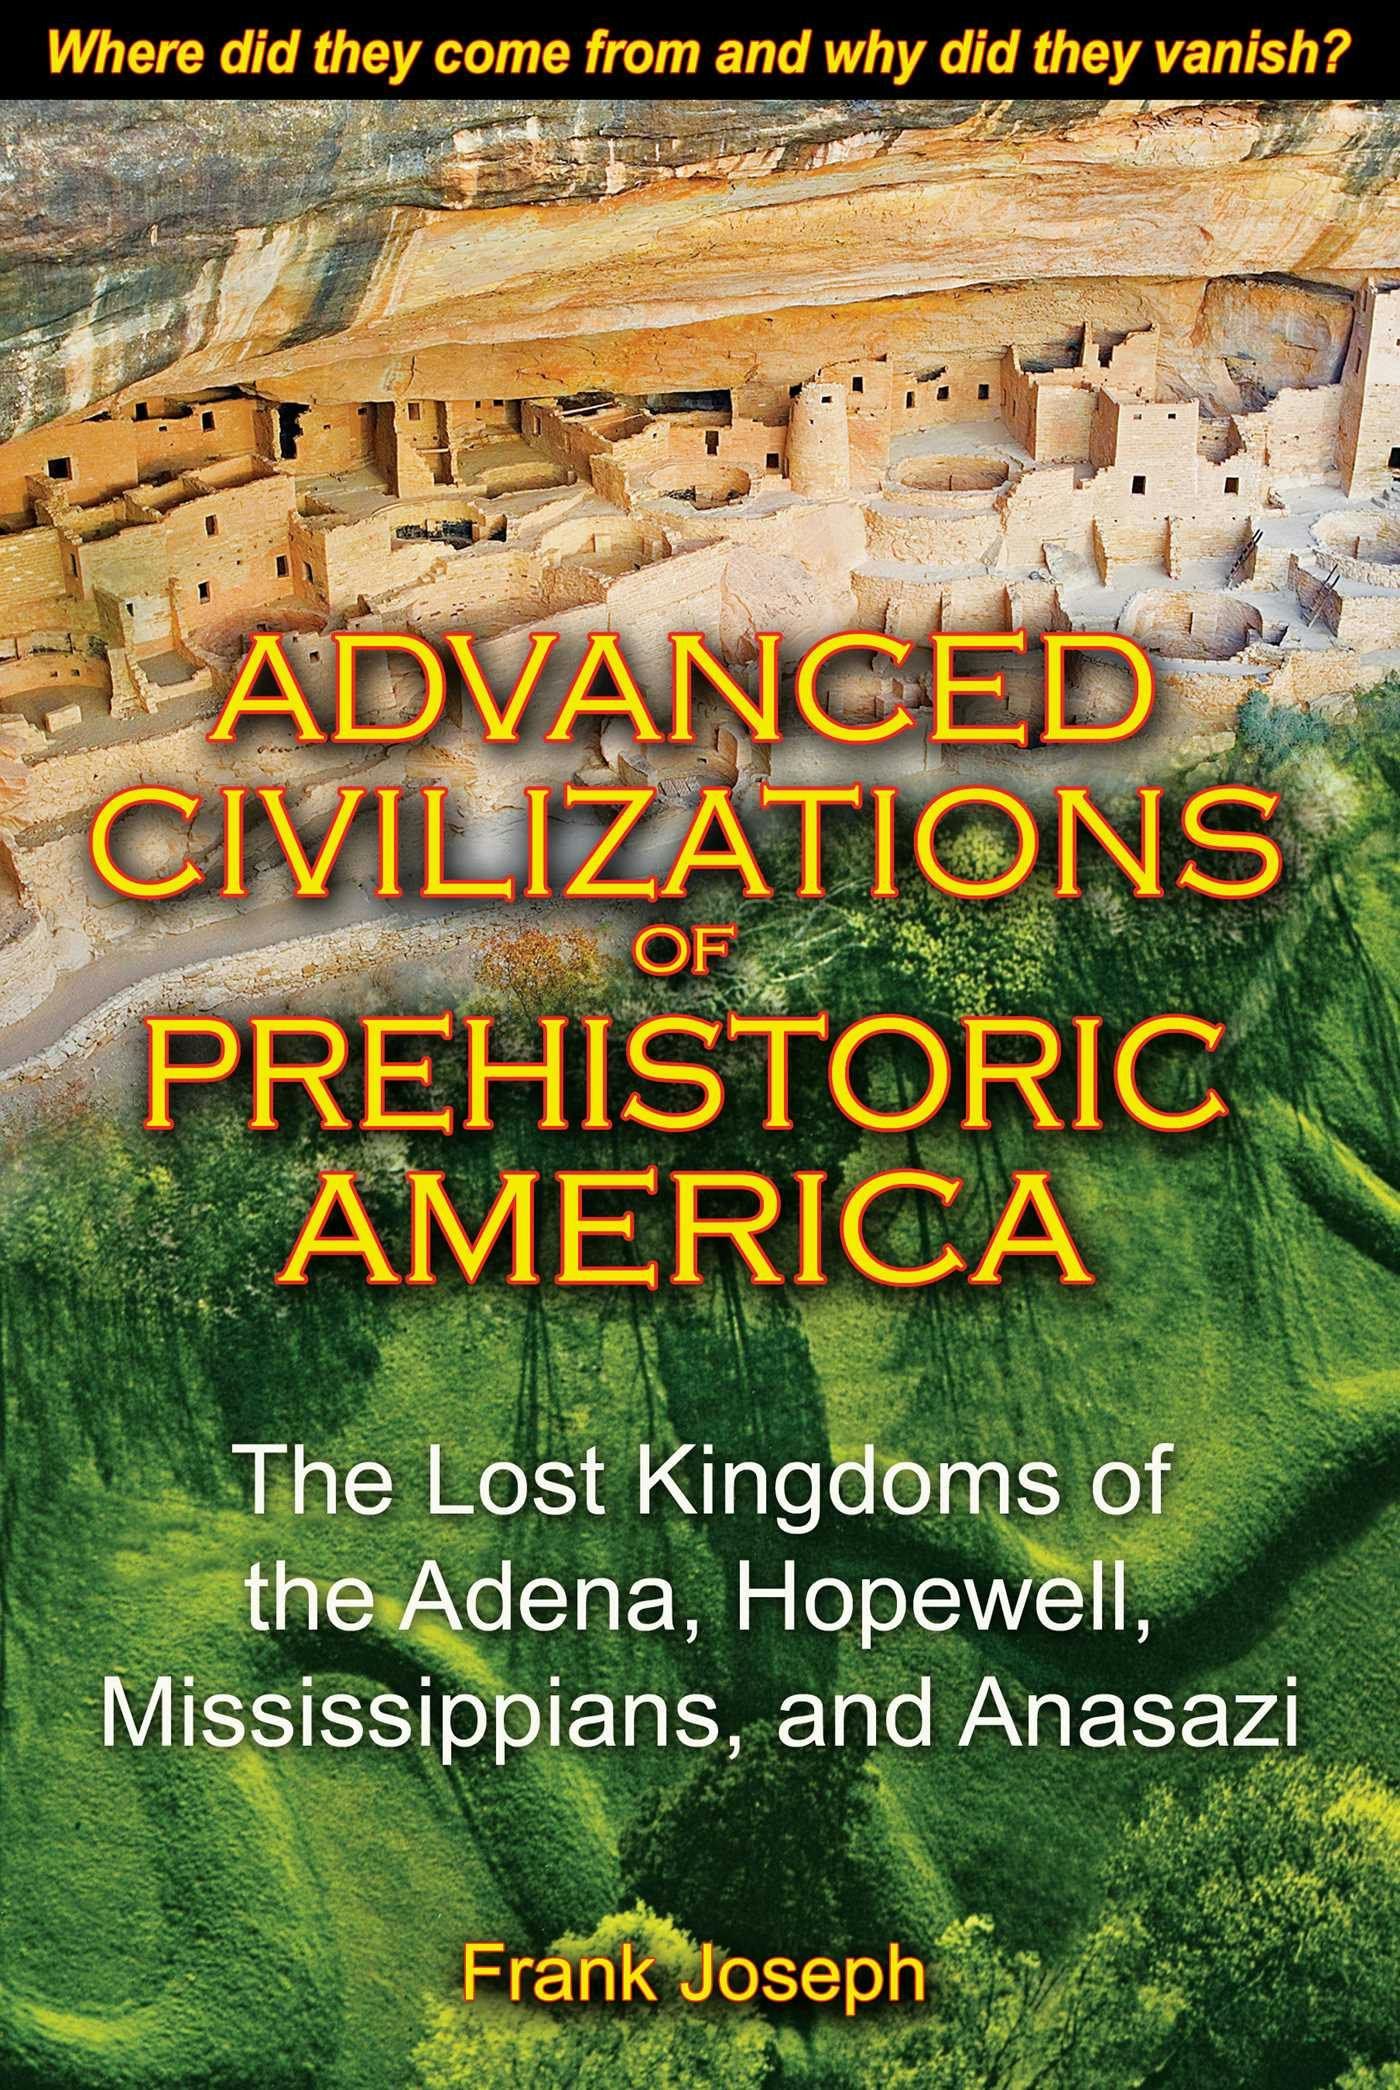 Advanced Civilizations of Prehistoric America: The Lost Kingdoms of the Adena, Hopewell, Mississippians, and Anasazi - undefined